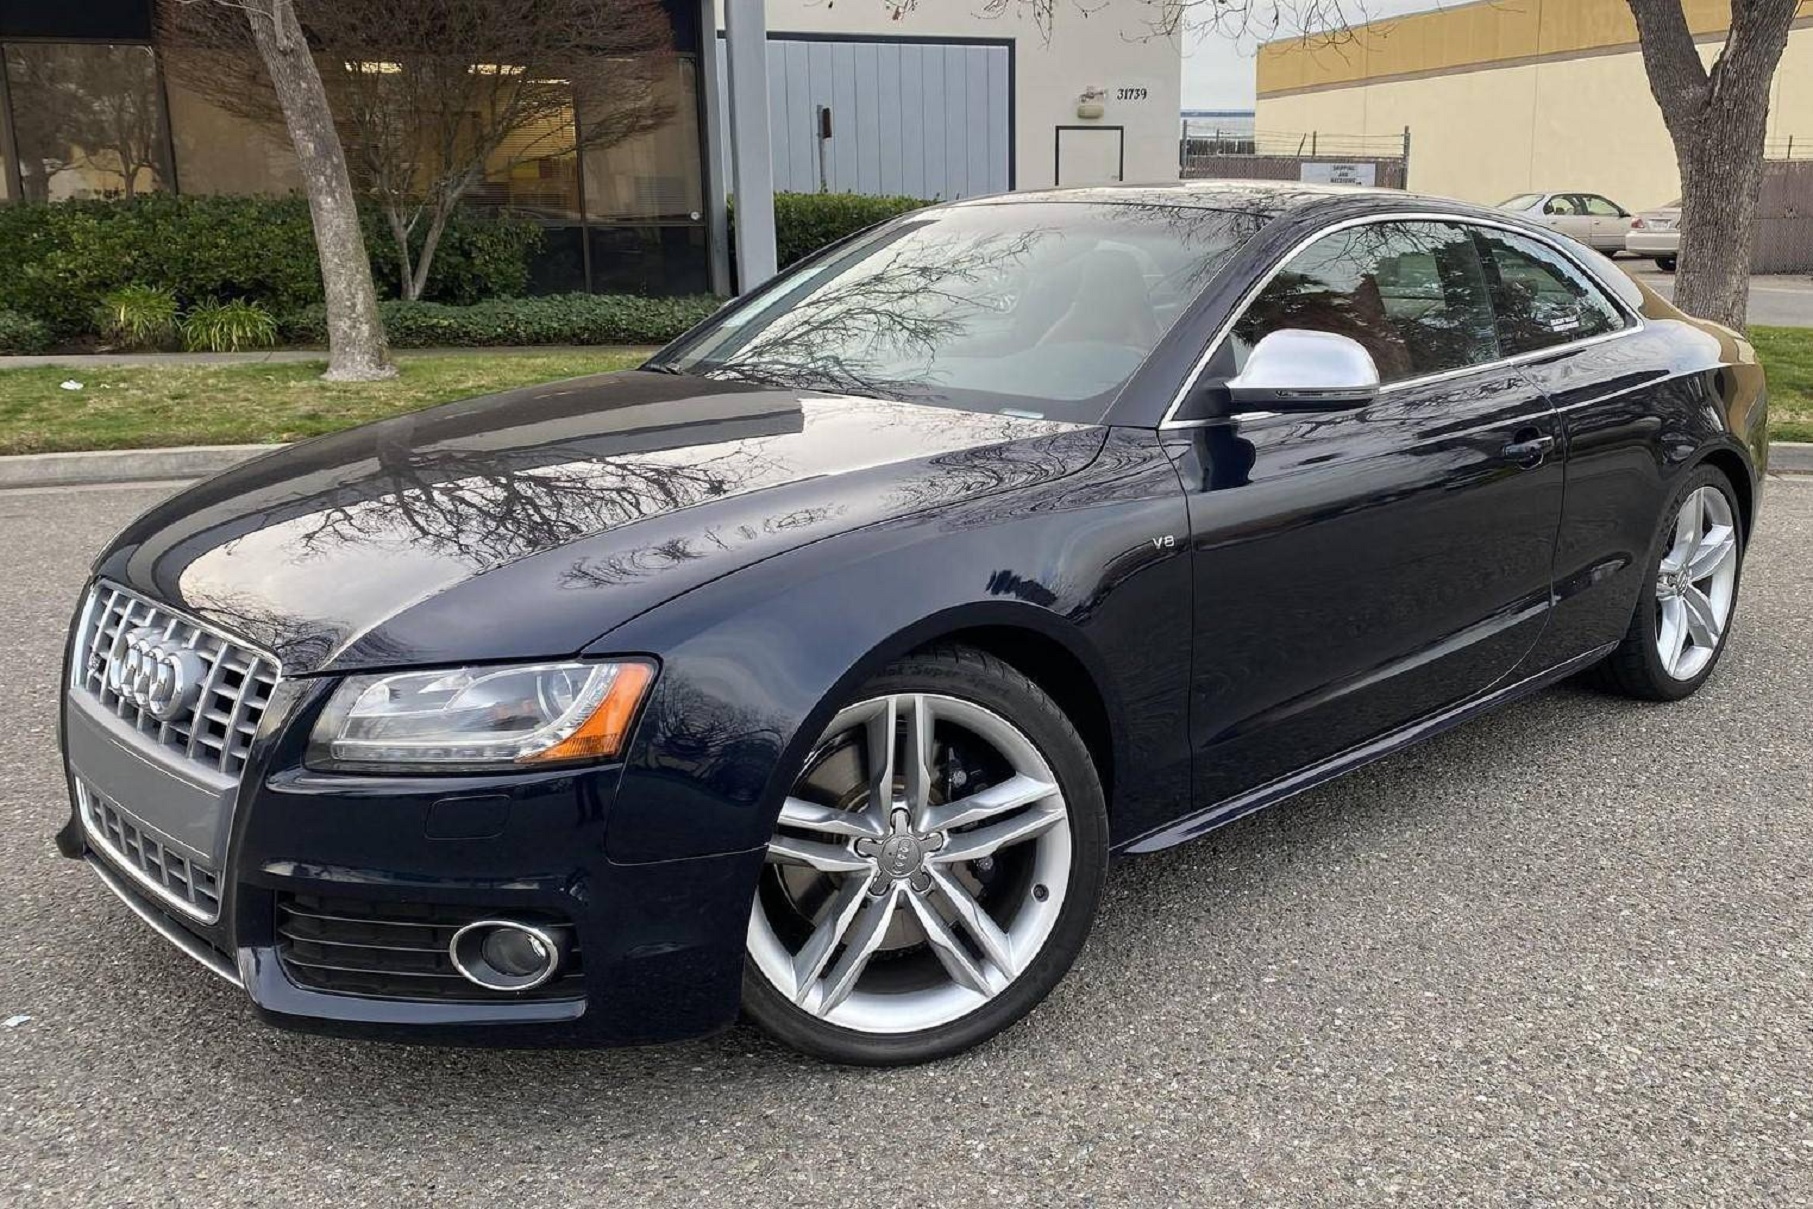 A dark-blue 2009 Audi S5 Coupe parked in a lot